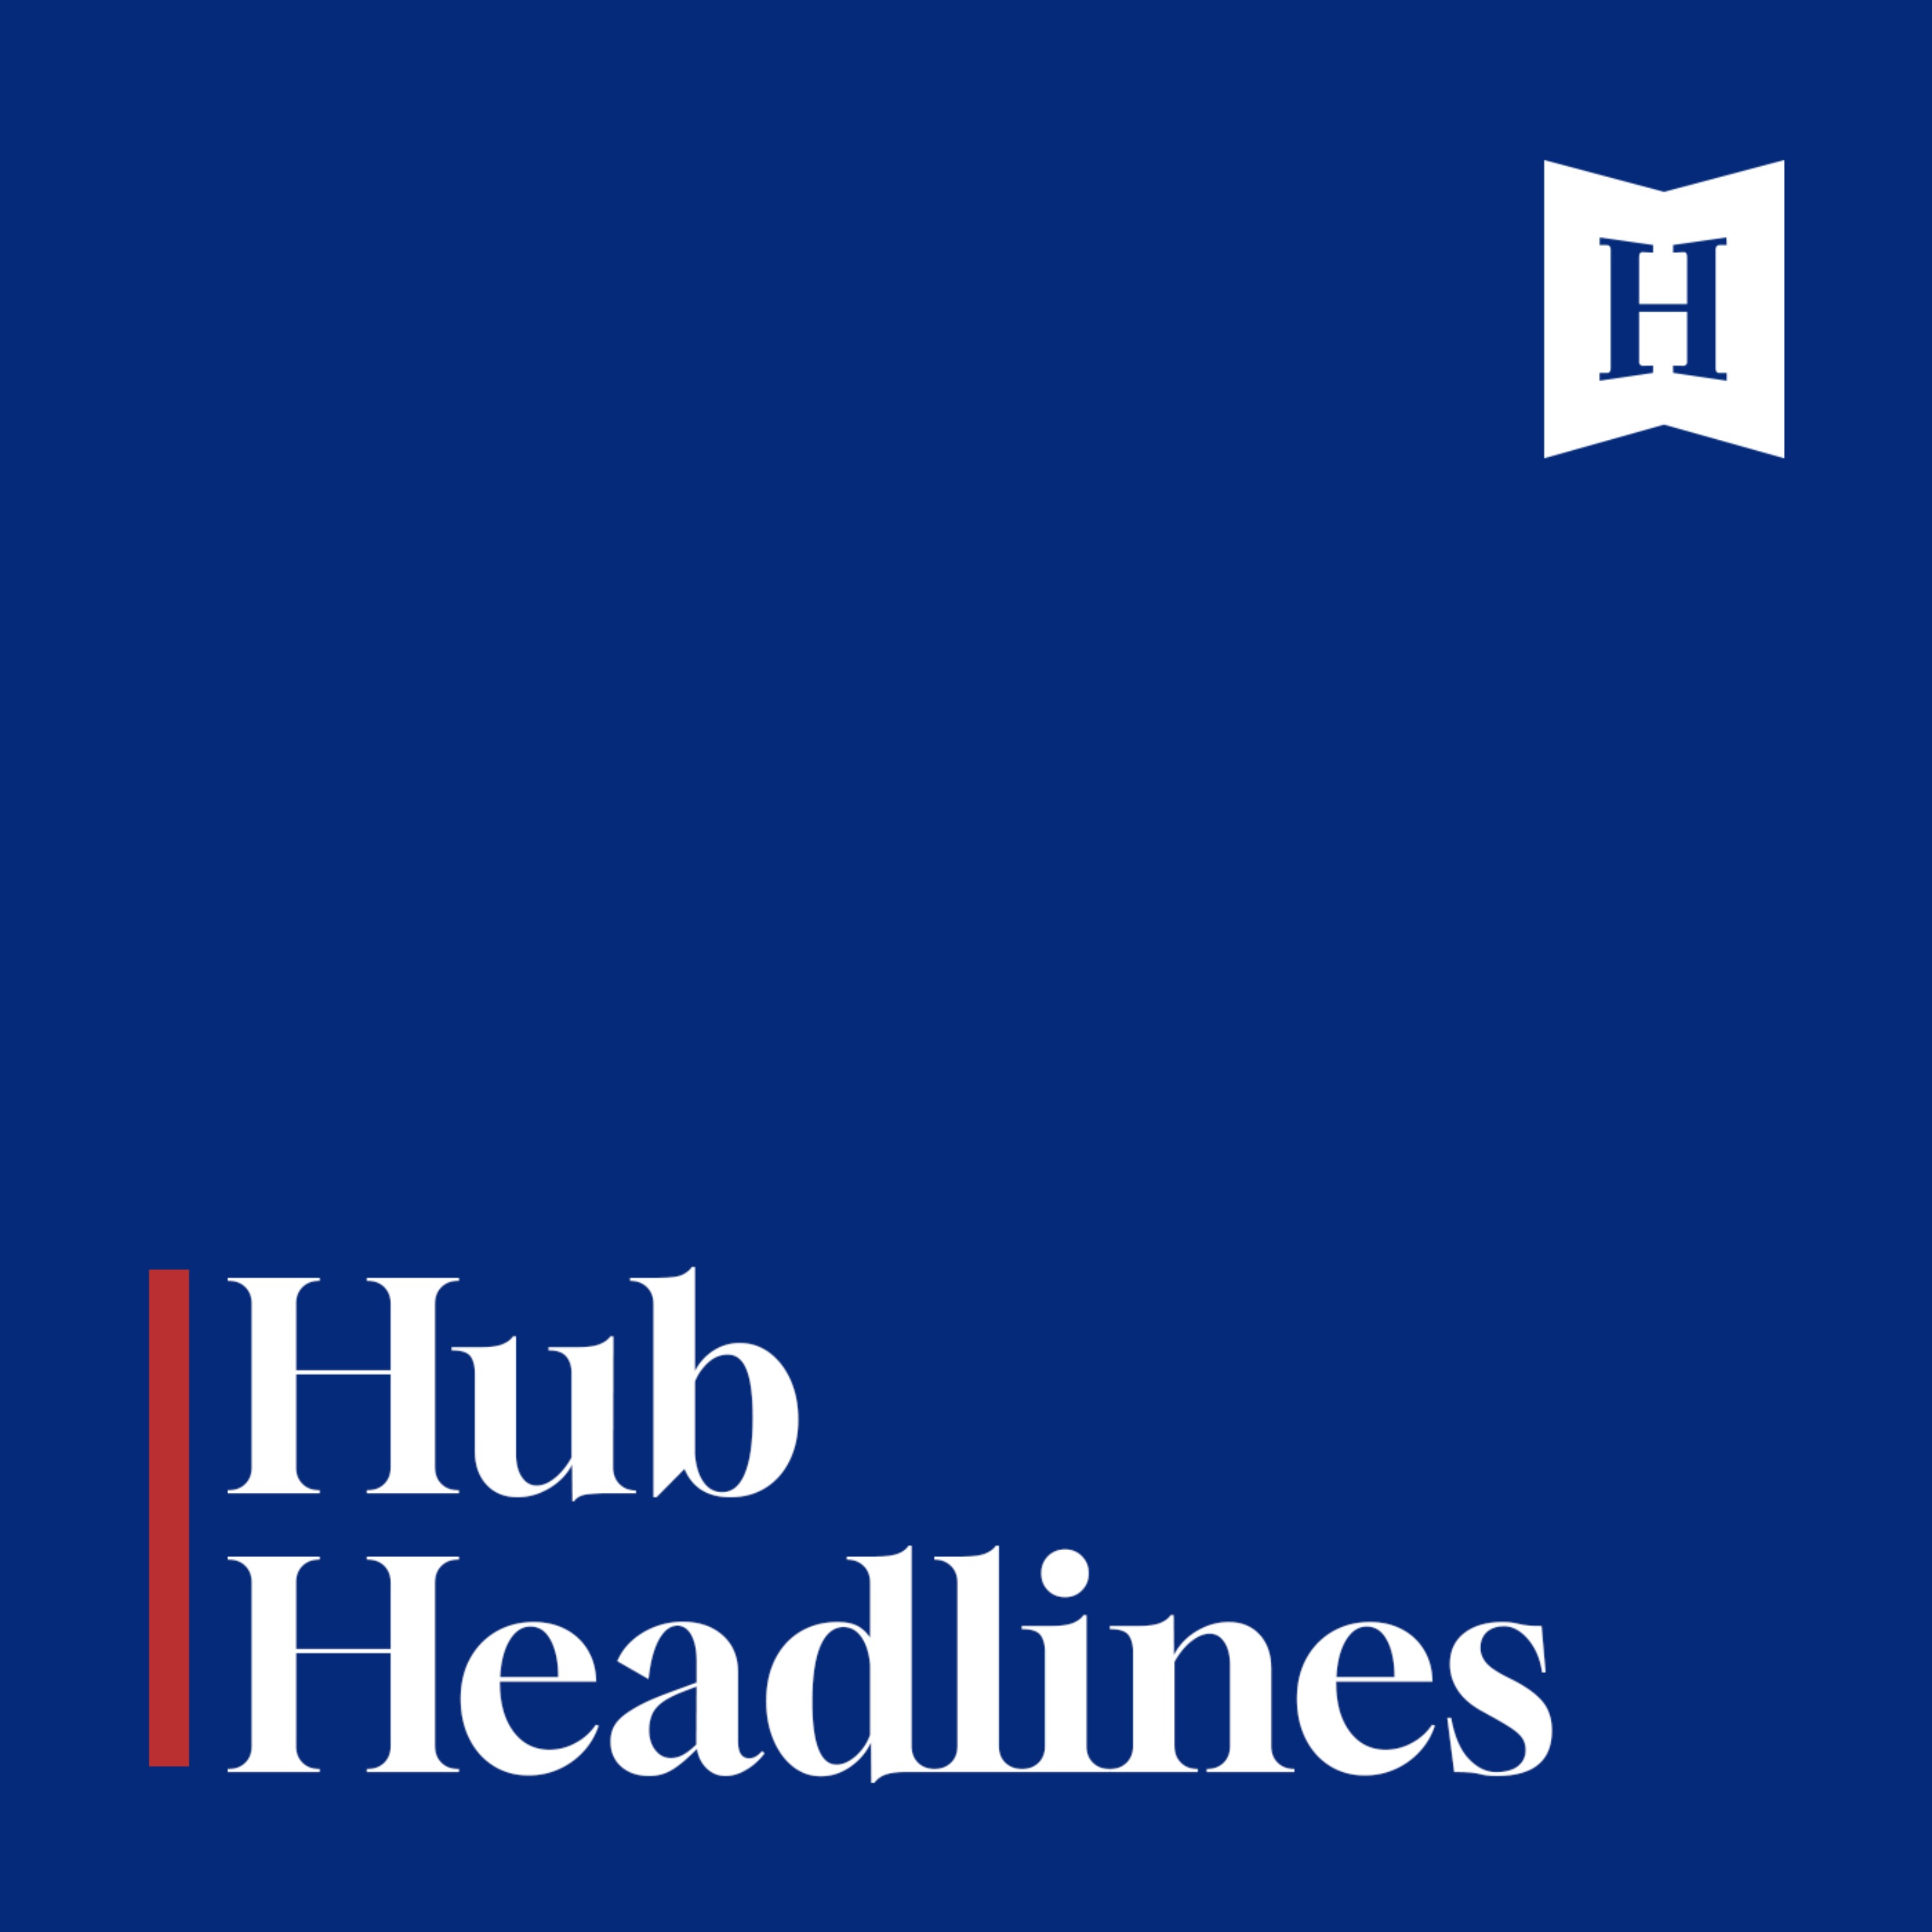 Hub Headlines: We should worry about inflation